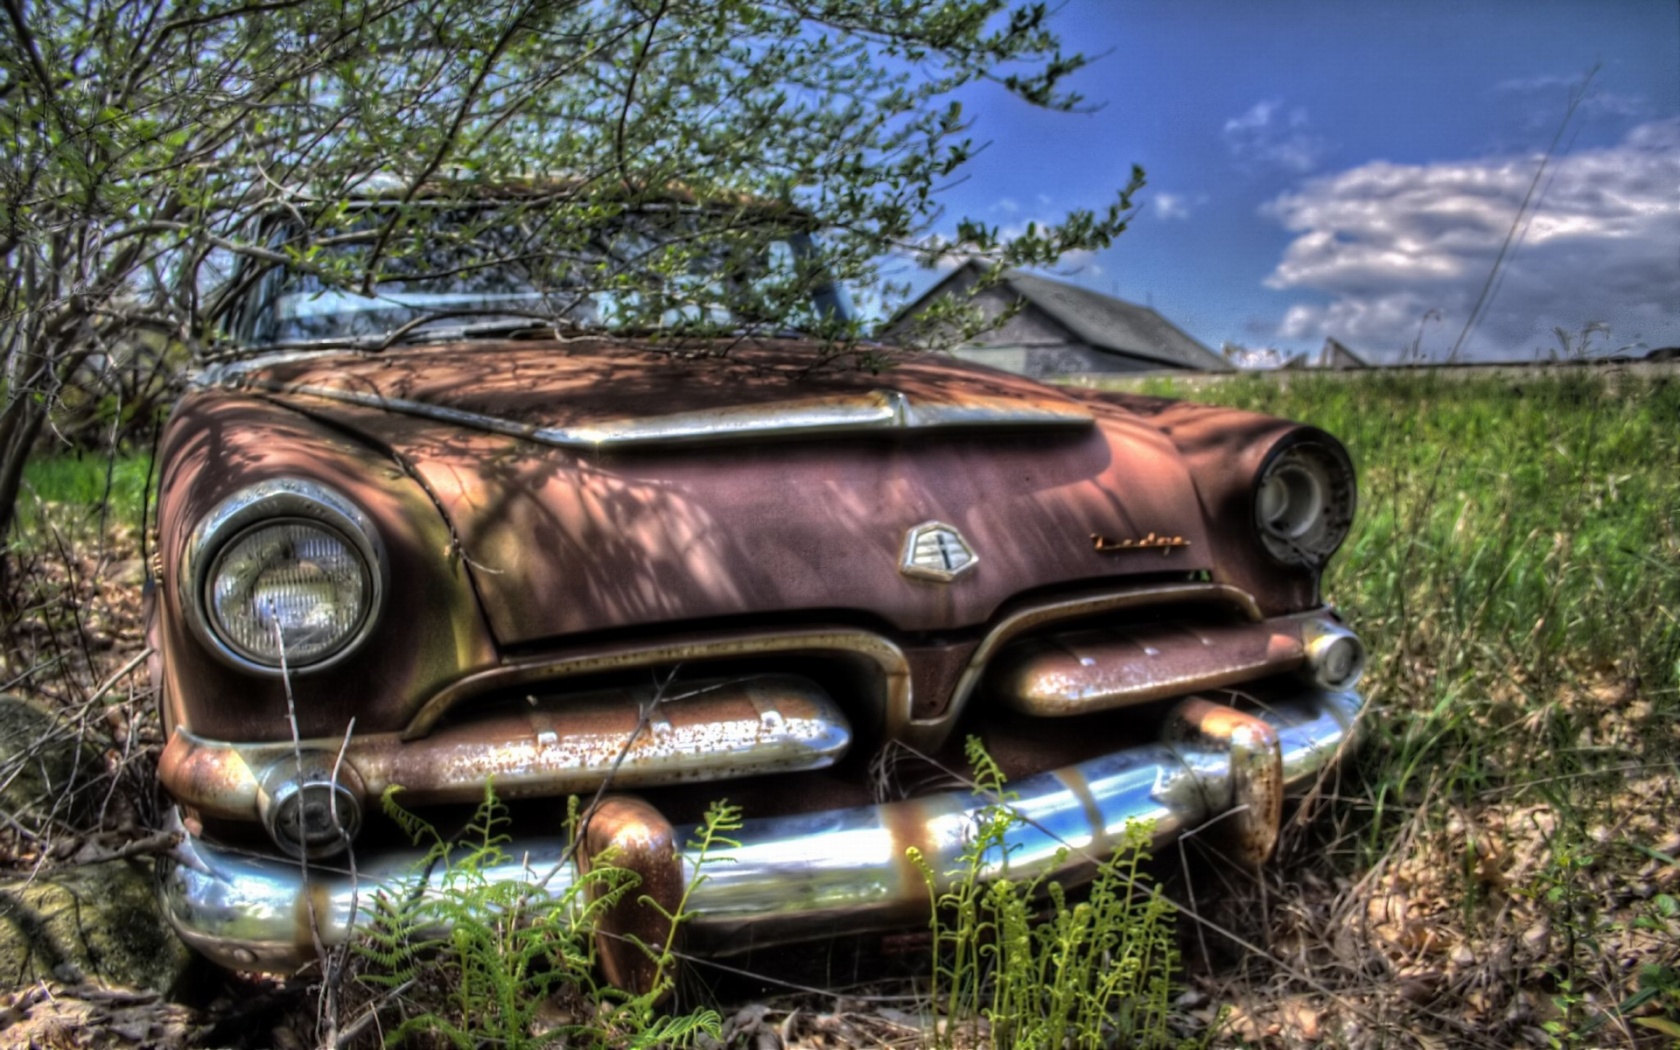 Abandoned Old Cars Wallpaper